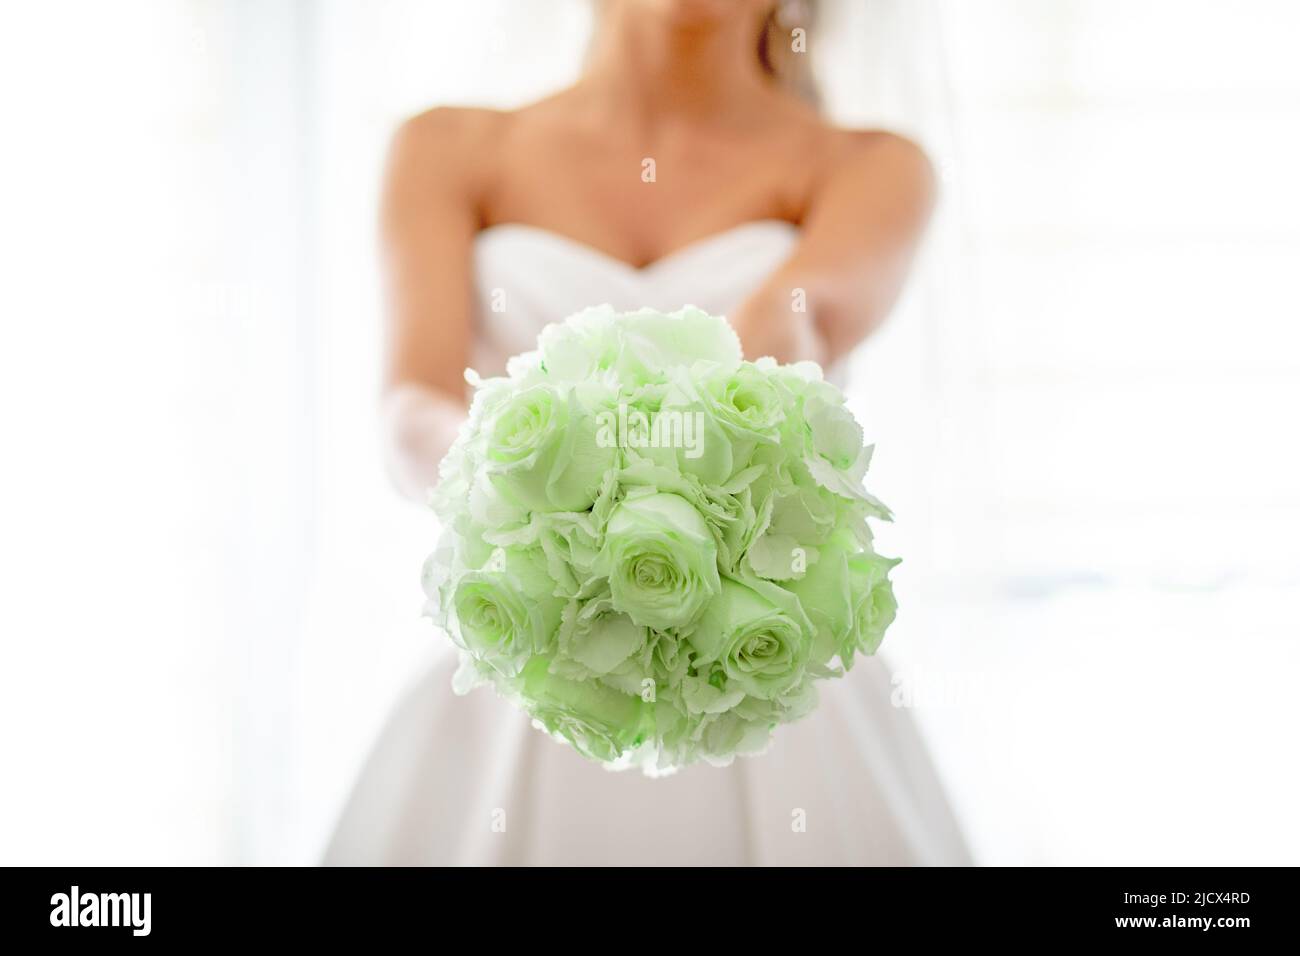 Today is wedding day! Bride with bouquet of gresh green roses in hands Stock Photo